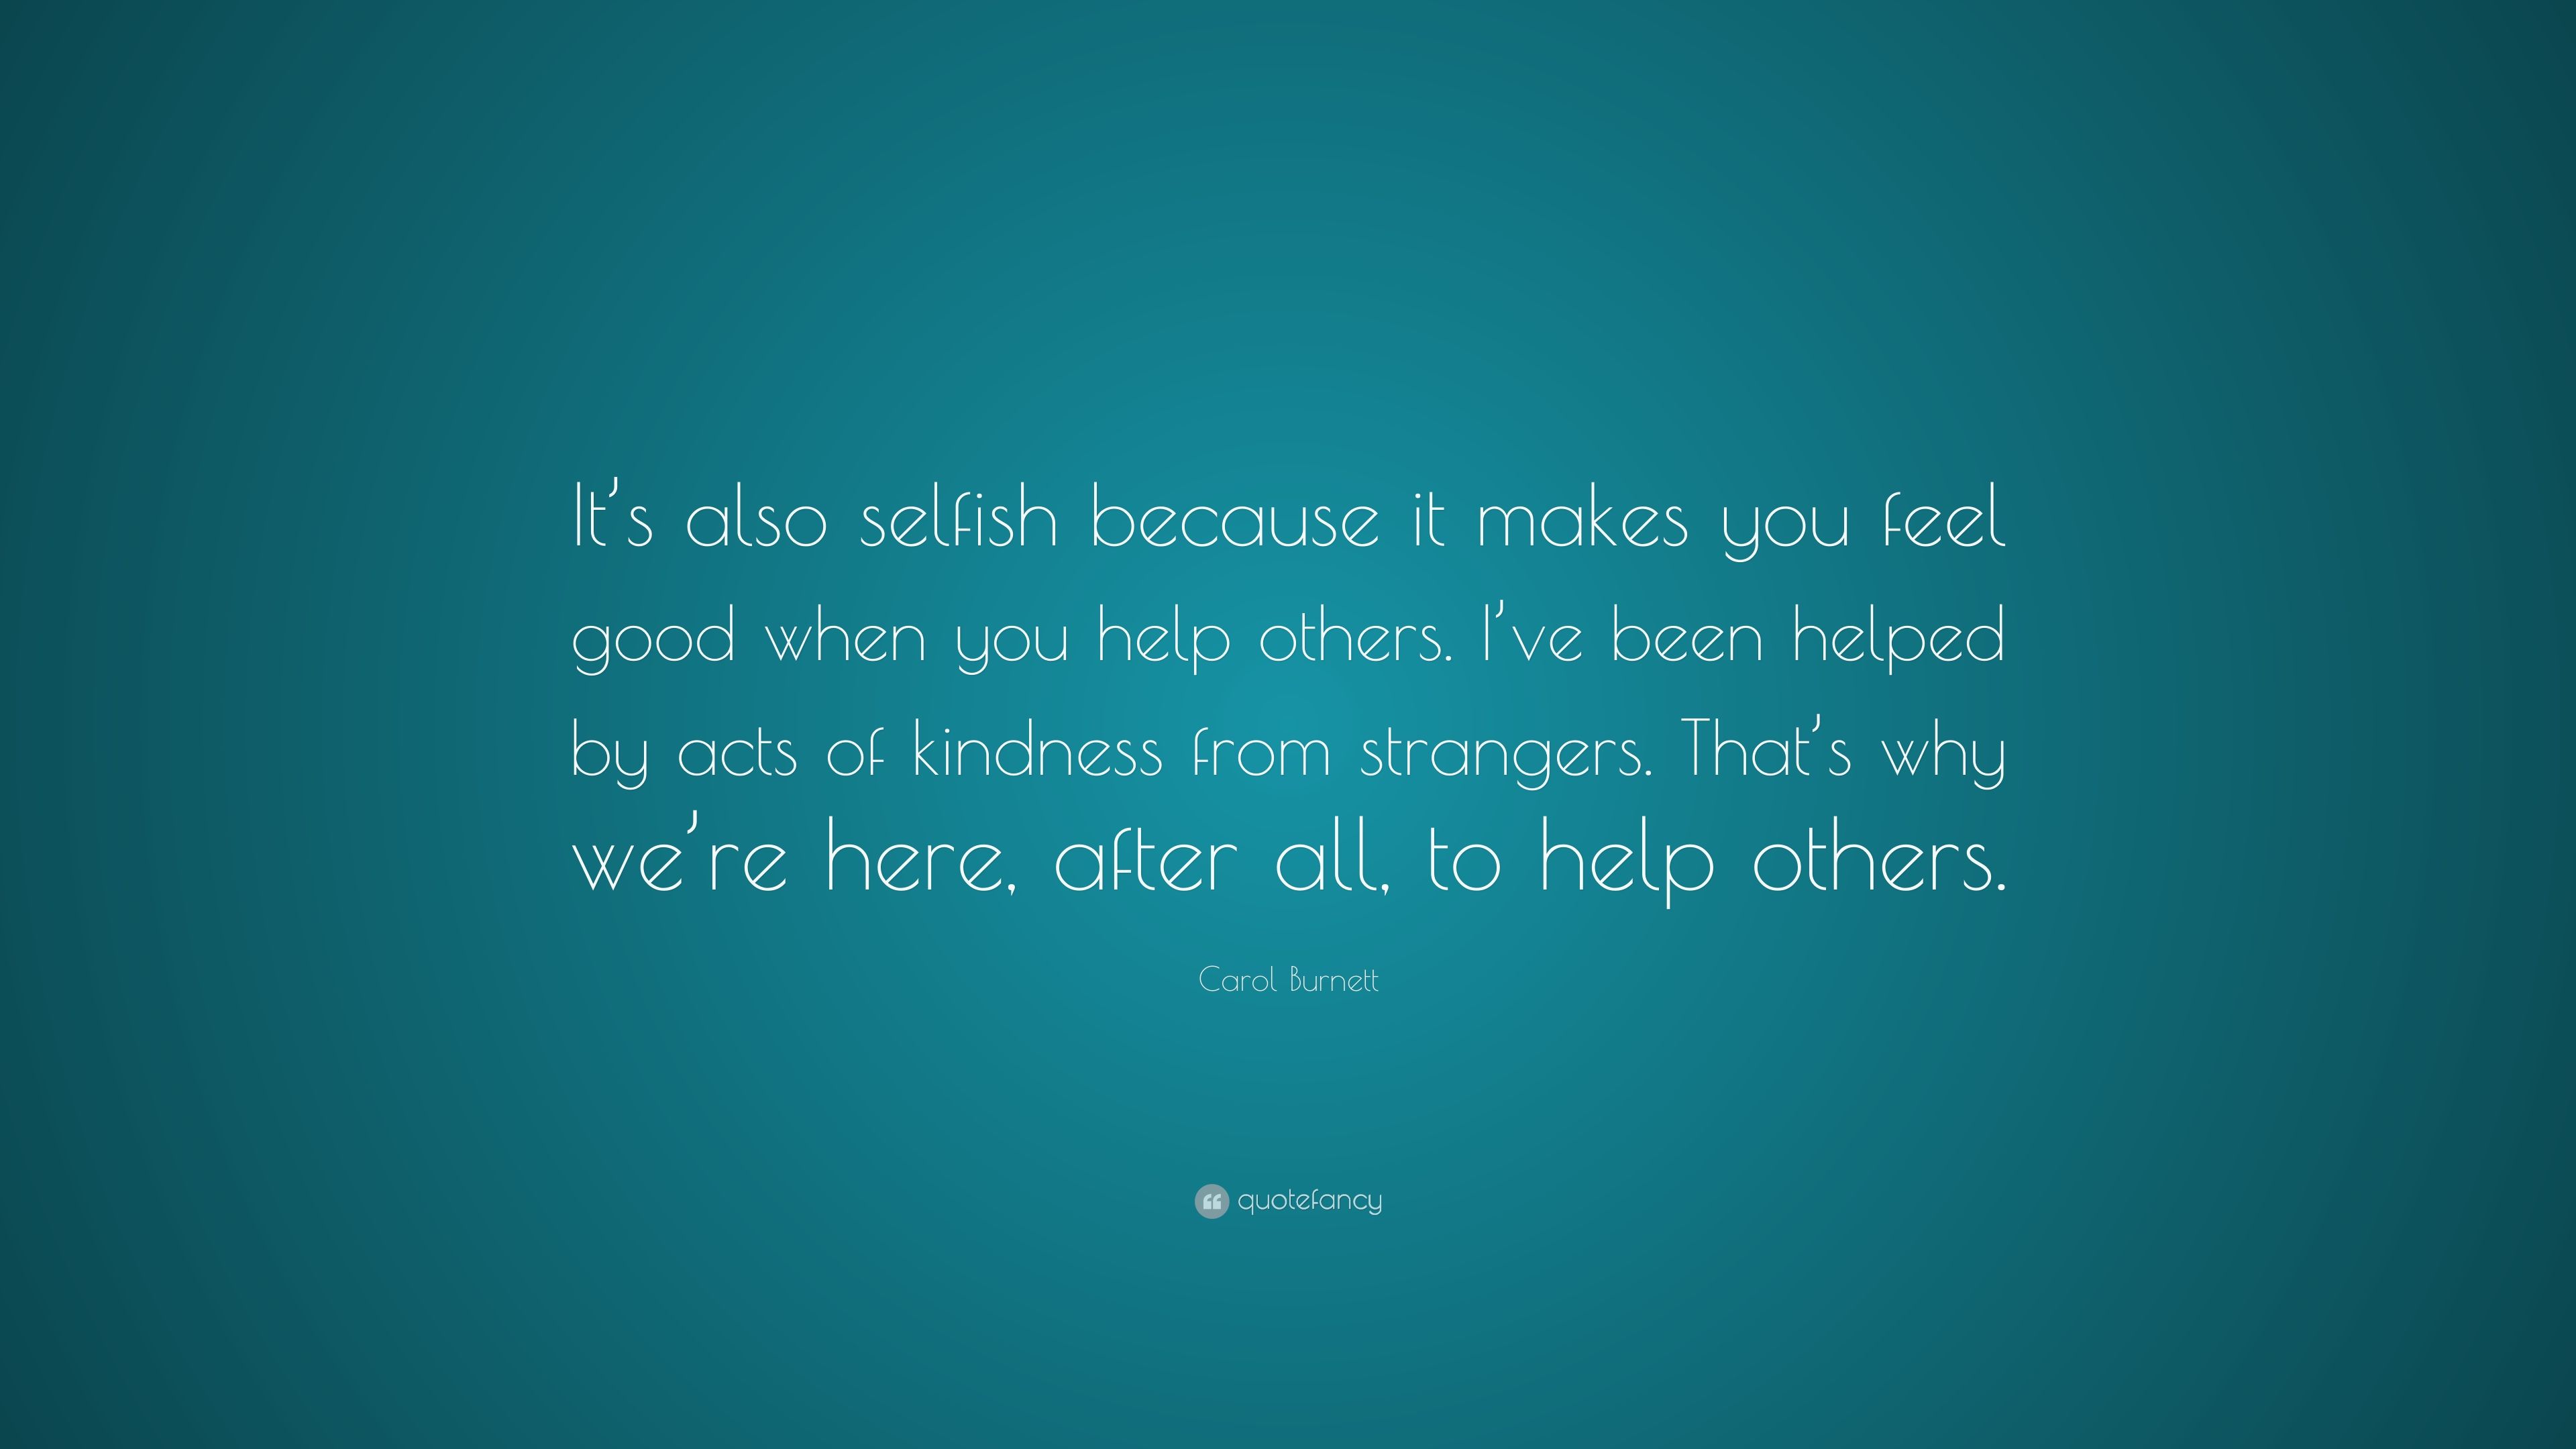 Carol Burnett Quote: “It's also selfish because it makes you feel